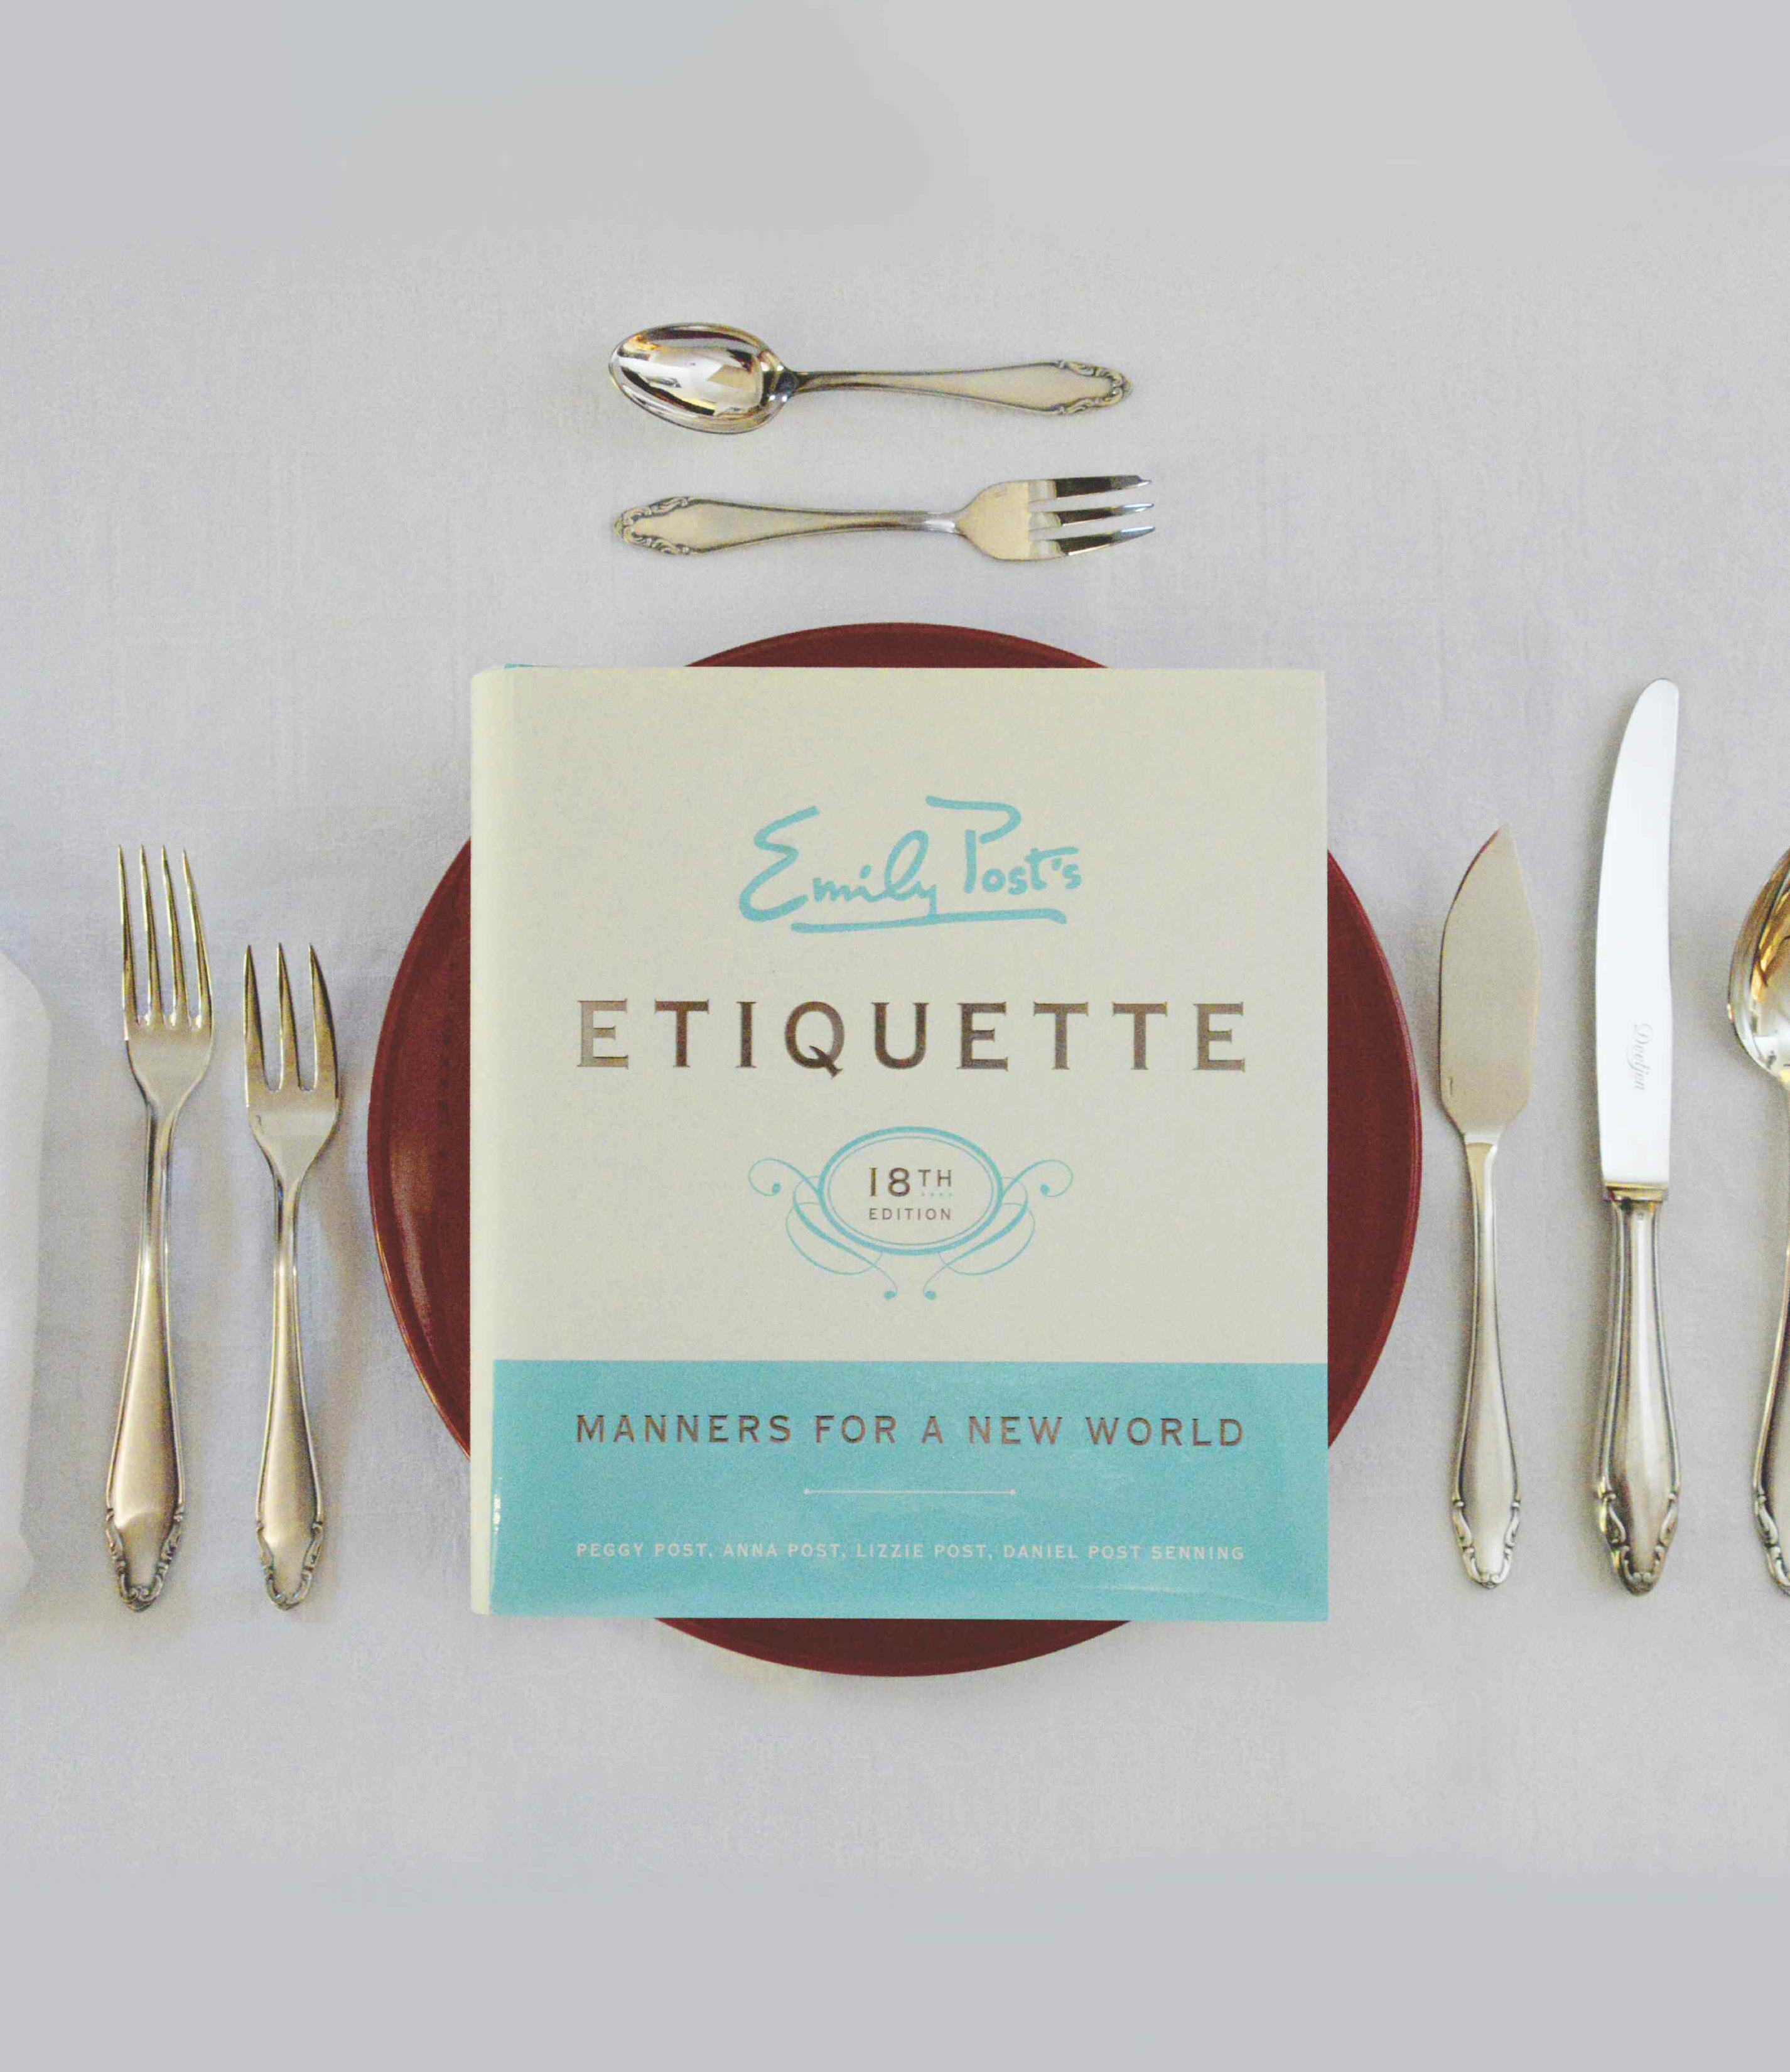 Etiquette sitting on a plate and silverware arrangement